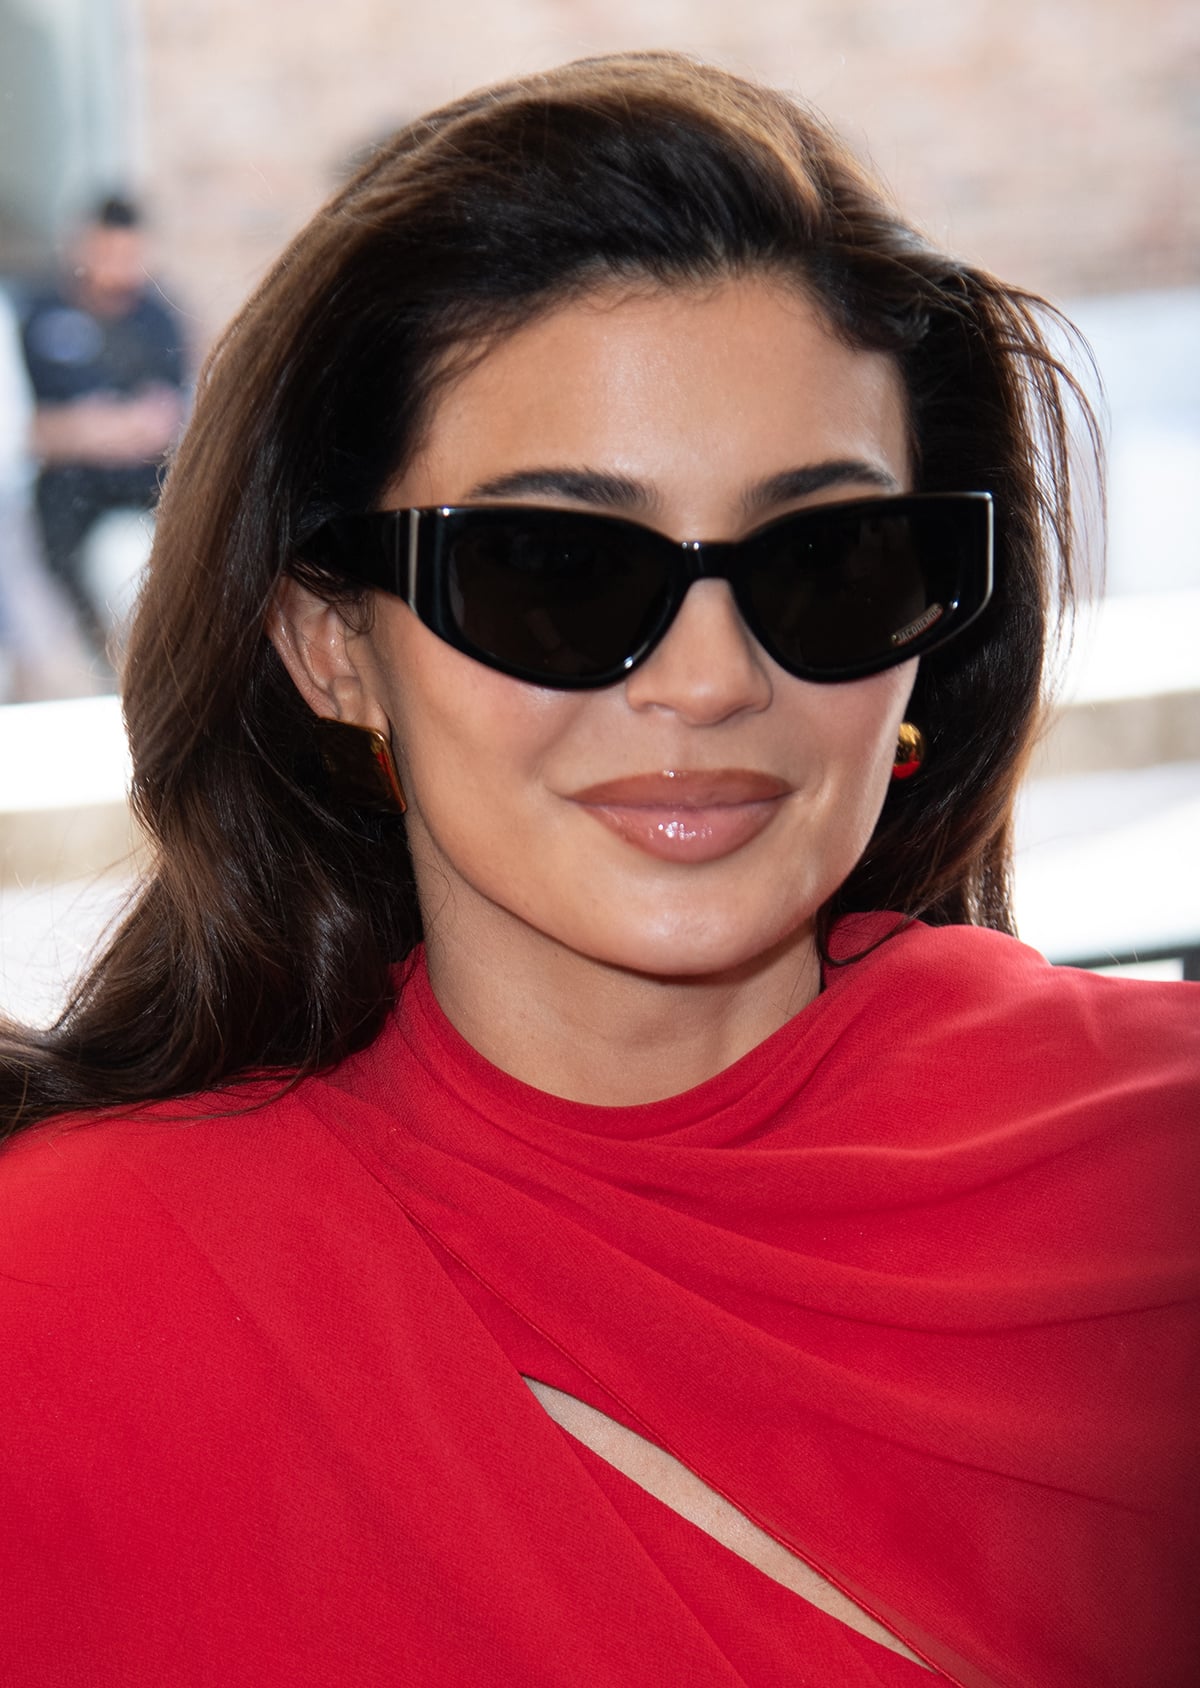 Wearing a retro backcombed hairstyle, Kylie Jenner styles her red Jacquemus draped minidress with Les Rond Carre mismatched earrings and black sunglasses